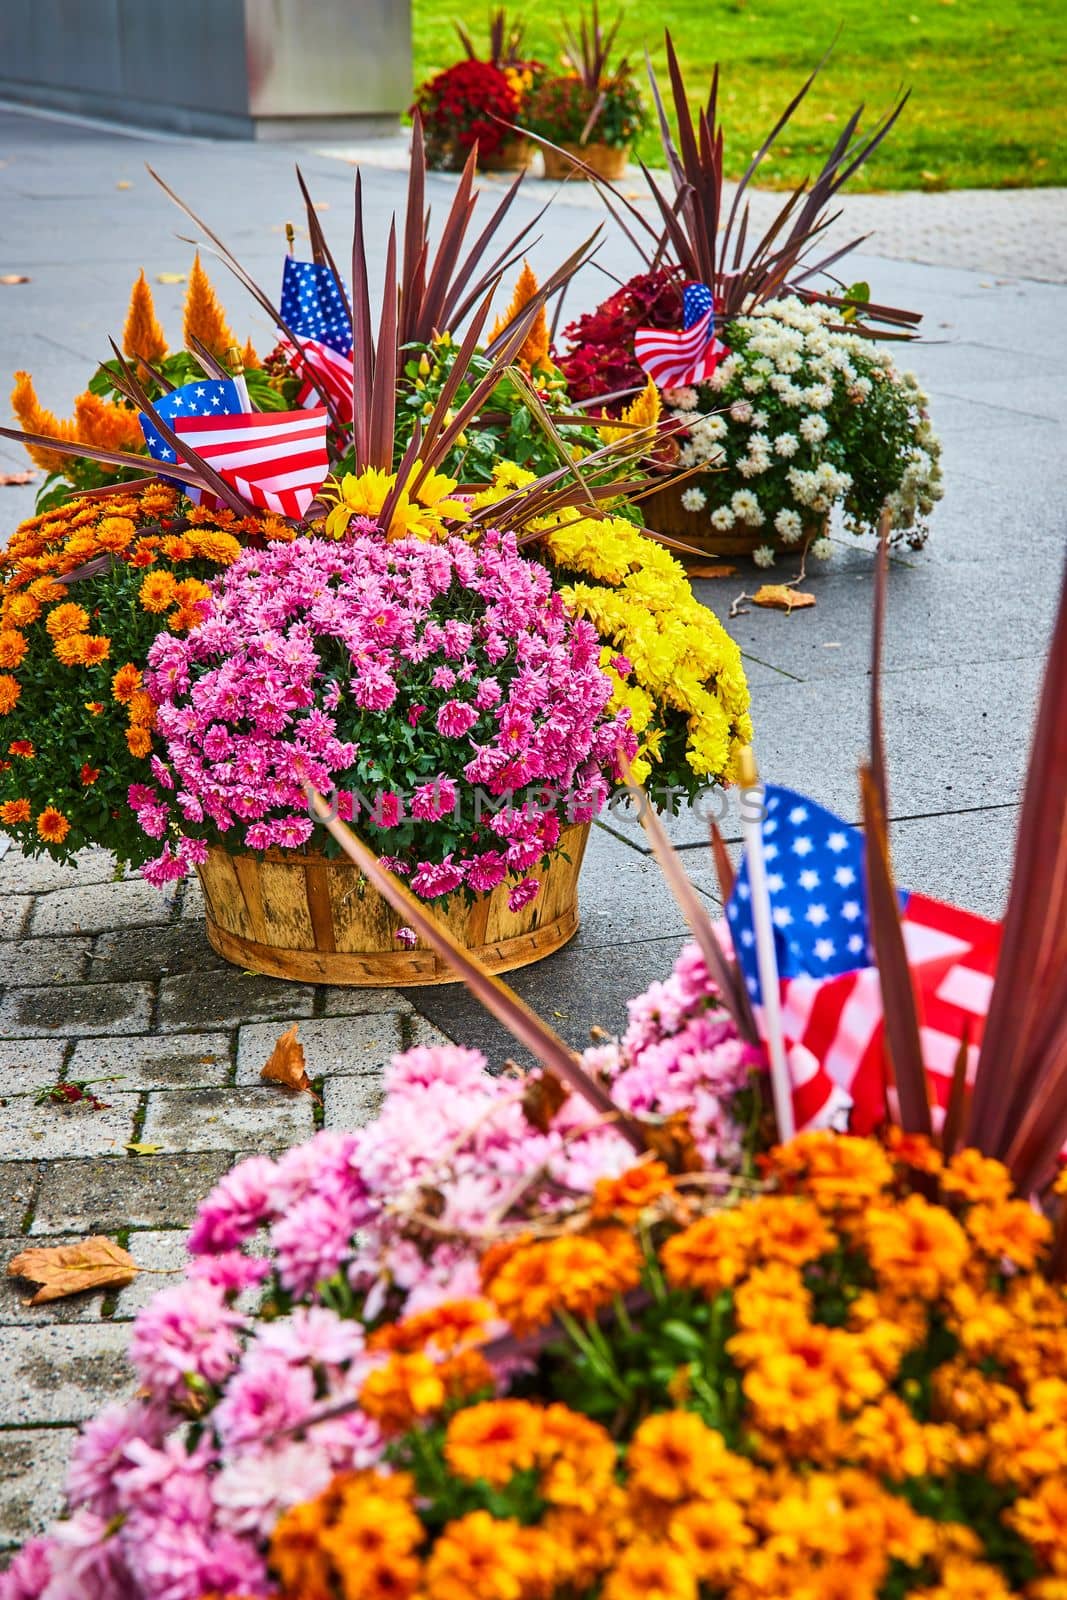 Image of Detail of American flowerpots with oranges, pinks, yellows, and American Flags